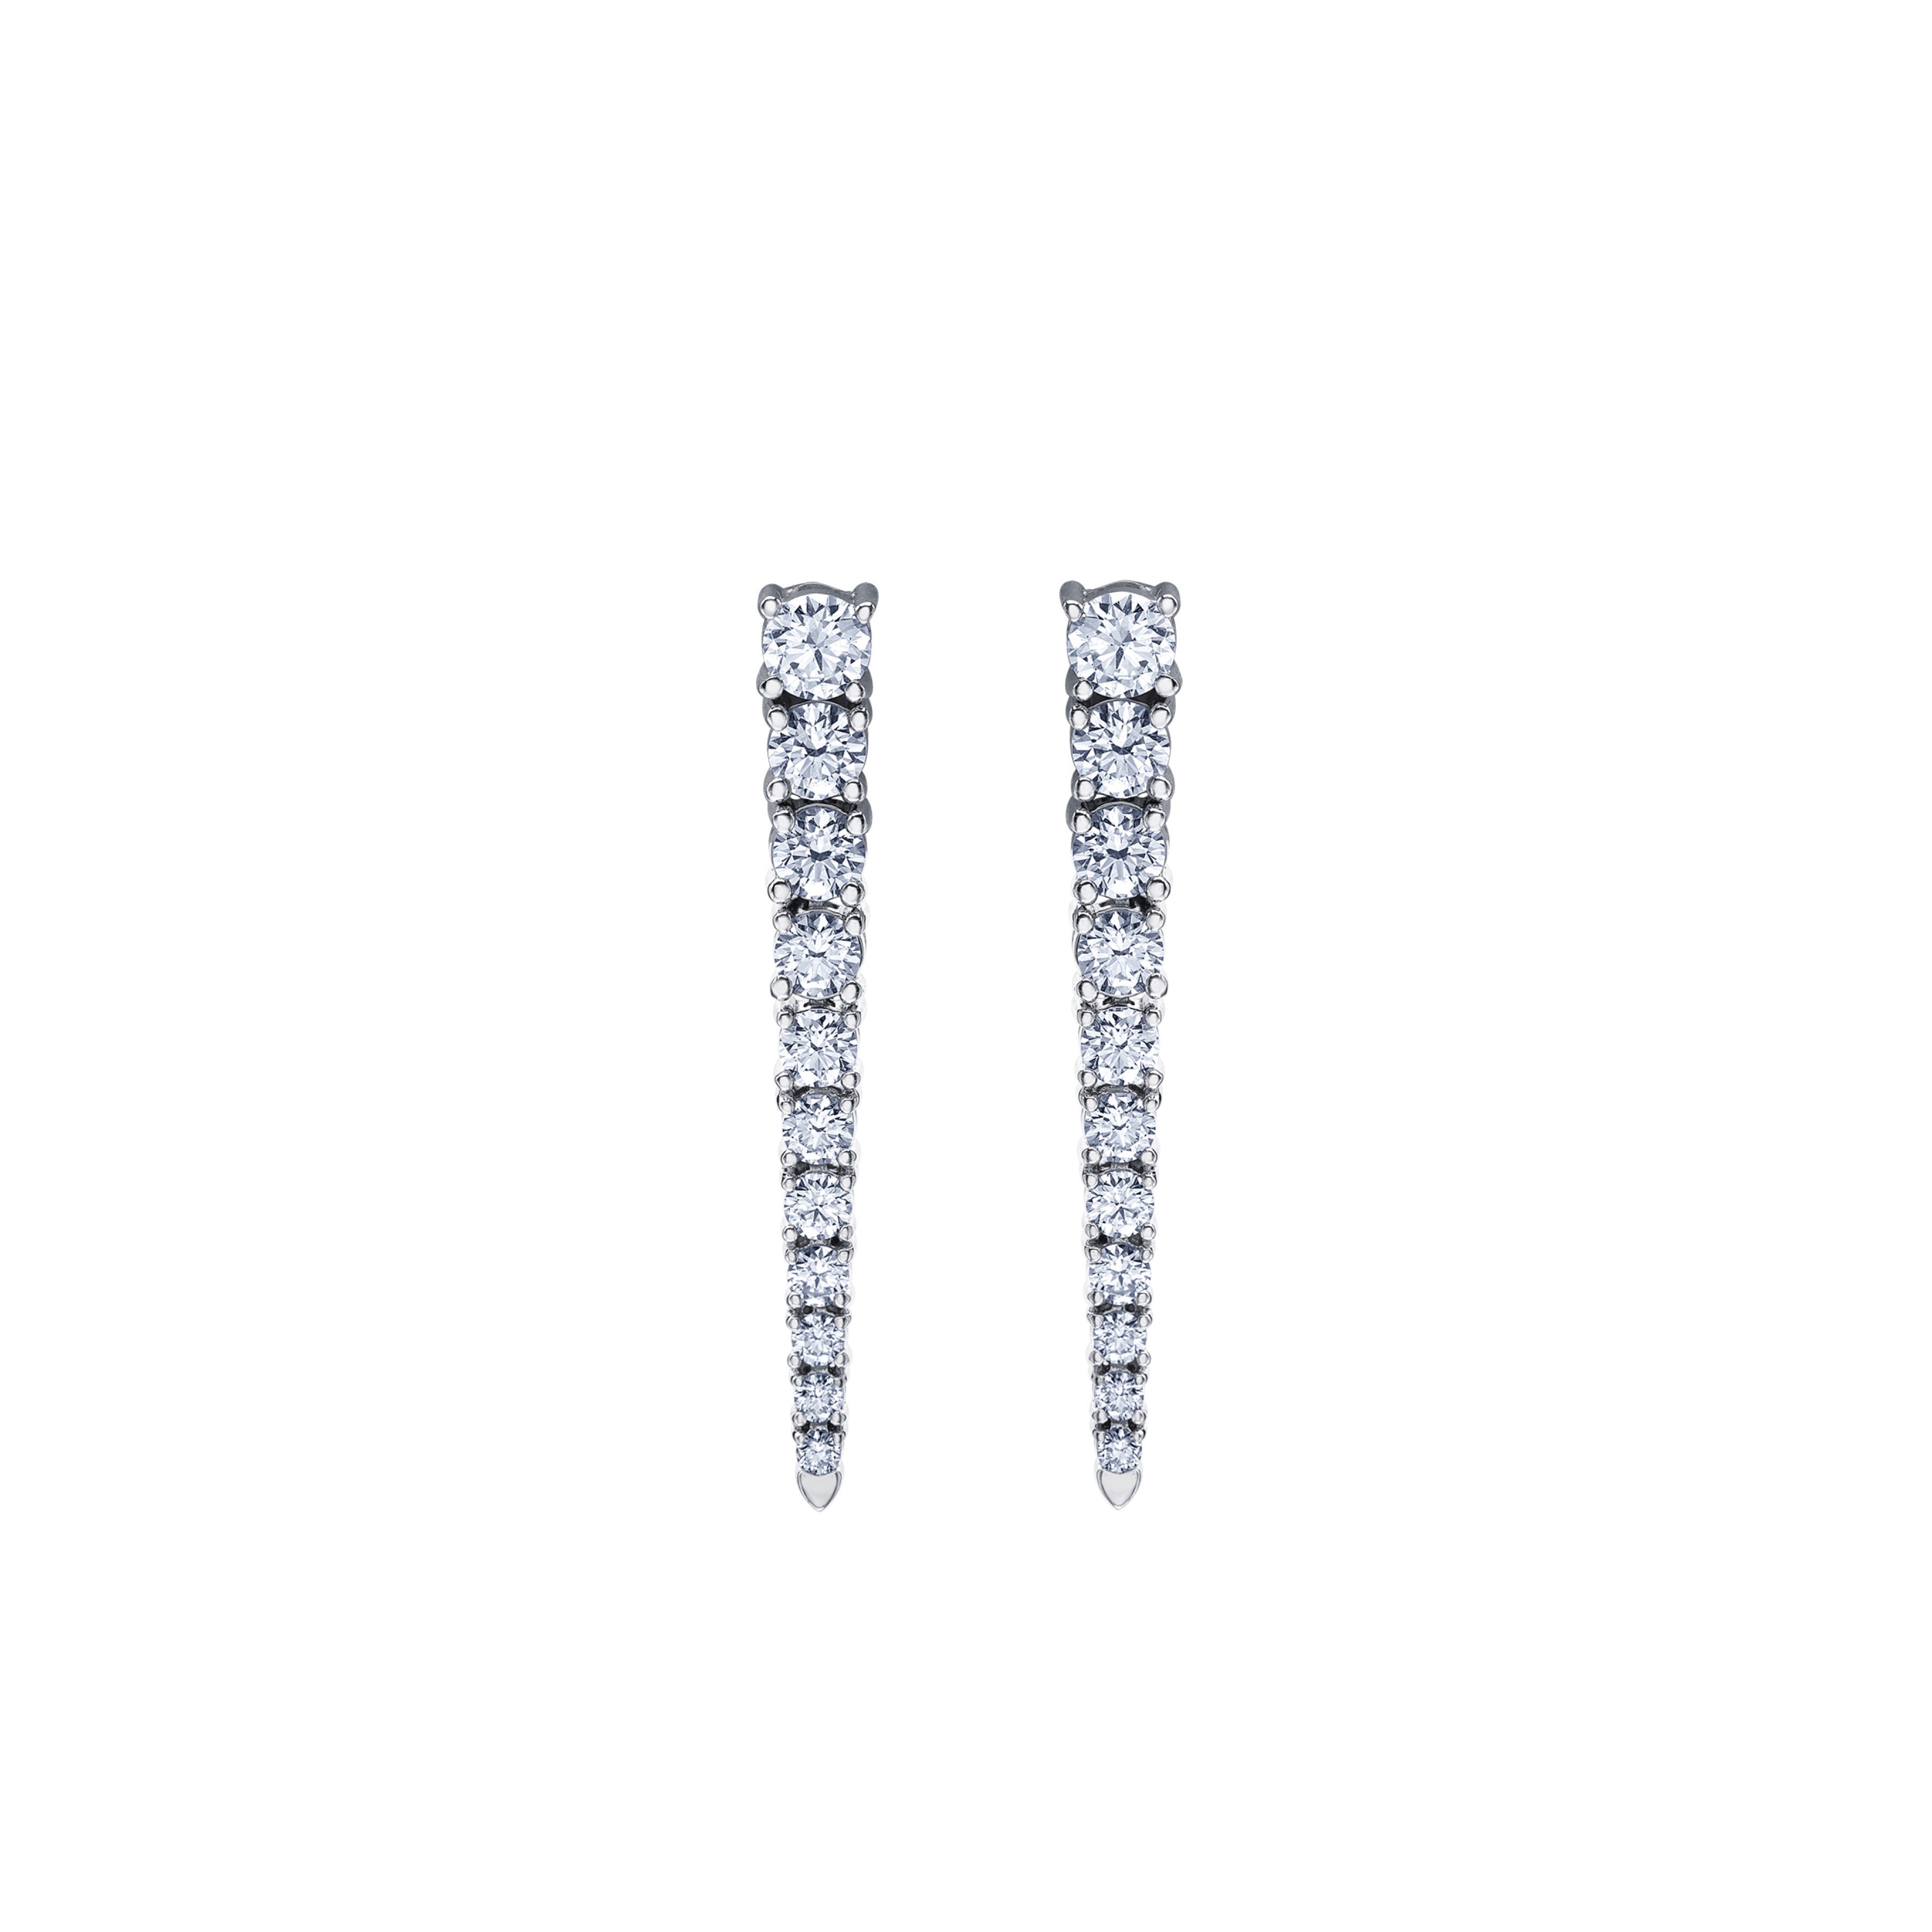 Crafted in 14KT white Certified Canadian Gold, these earrings feature icicles set with round brilliant-cut Canadian diamonds.